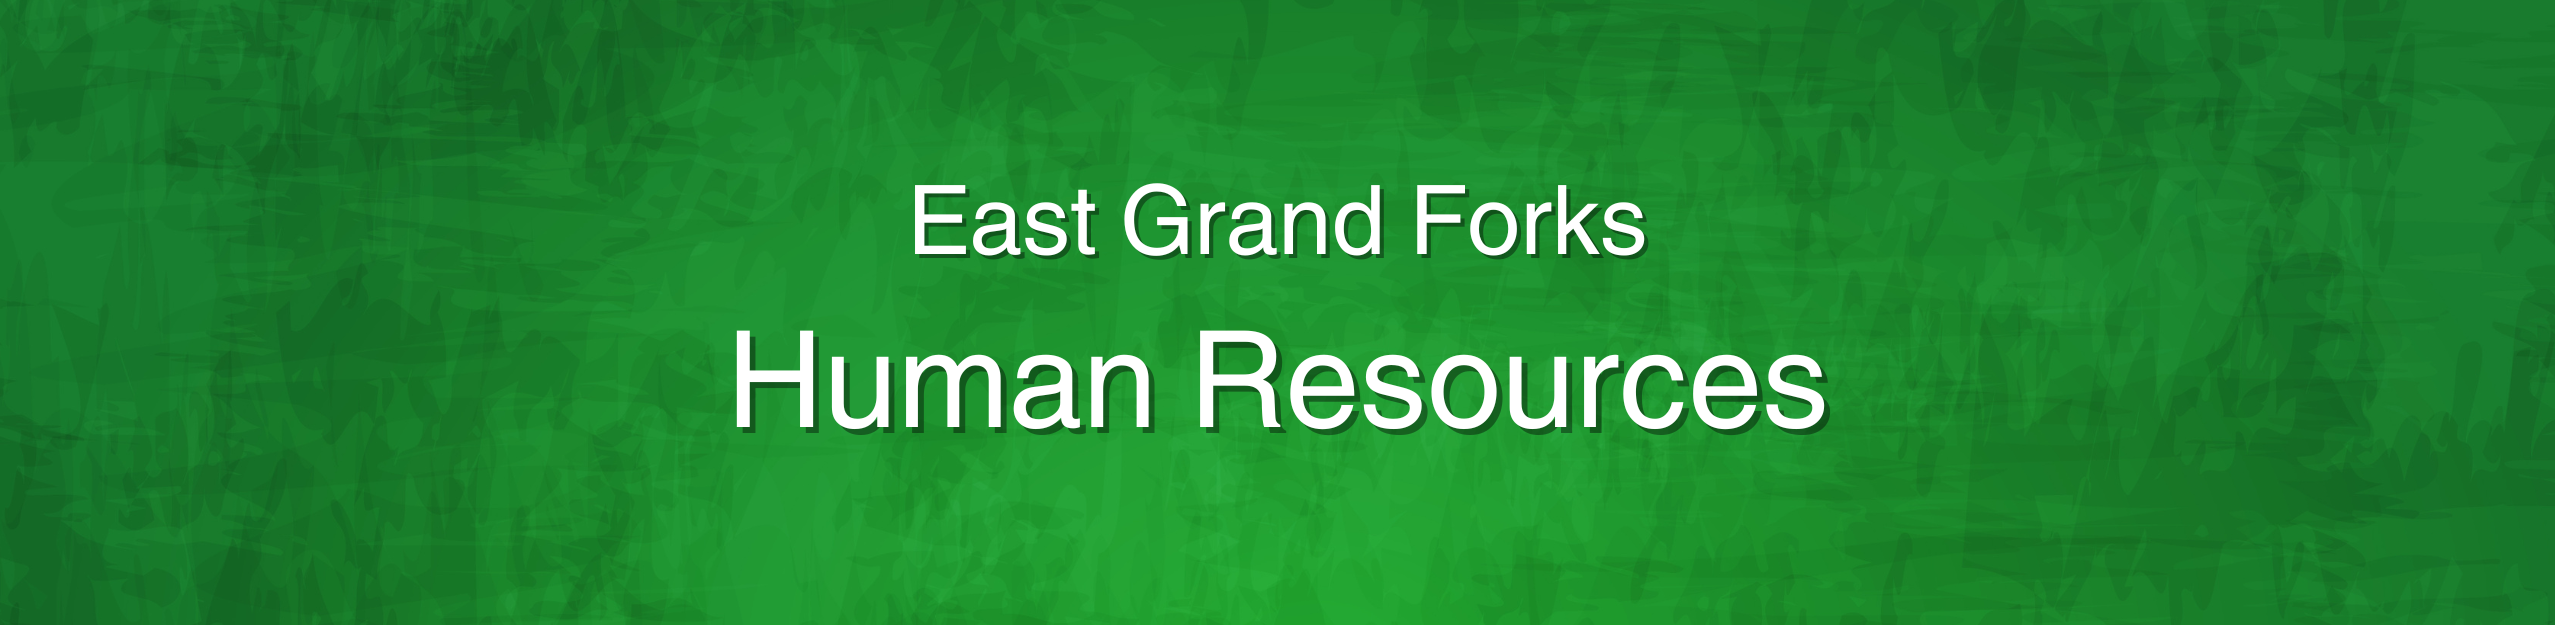 East Grand Forks Human Resources